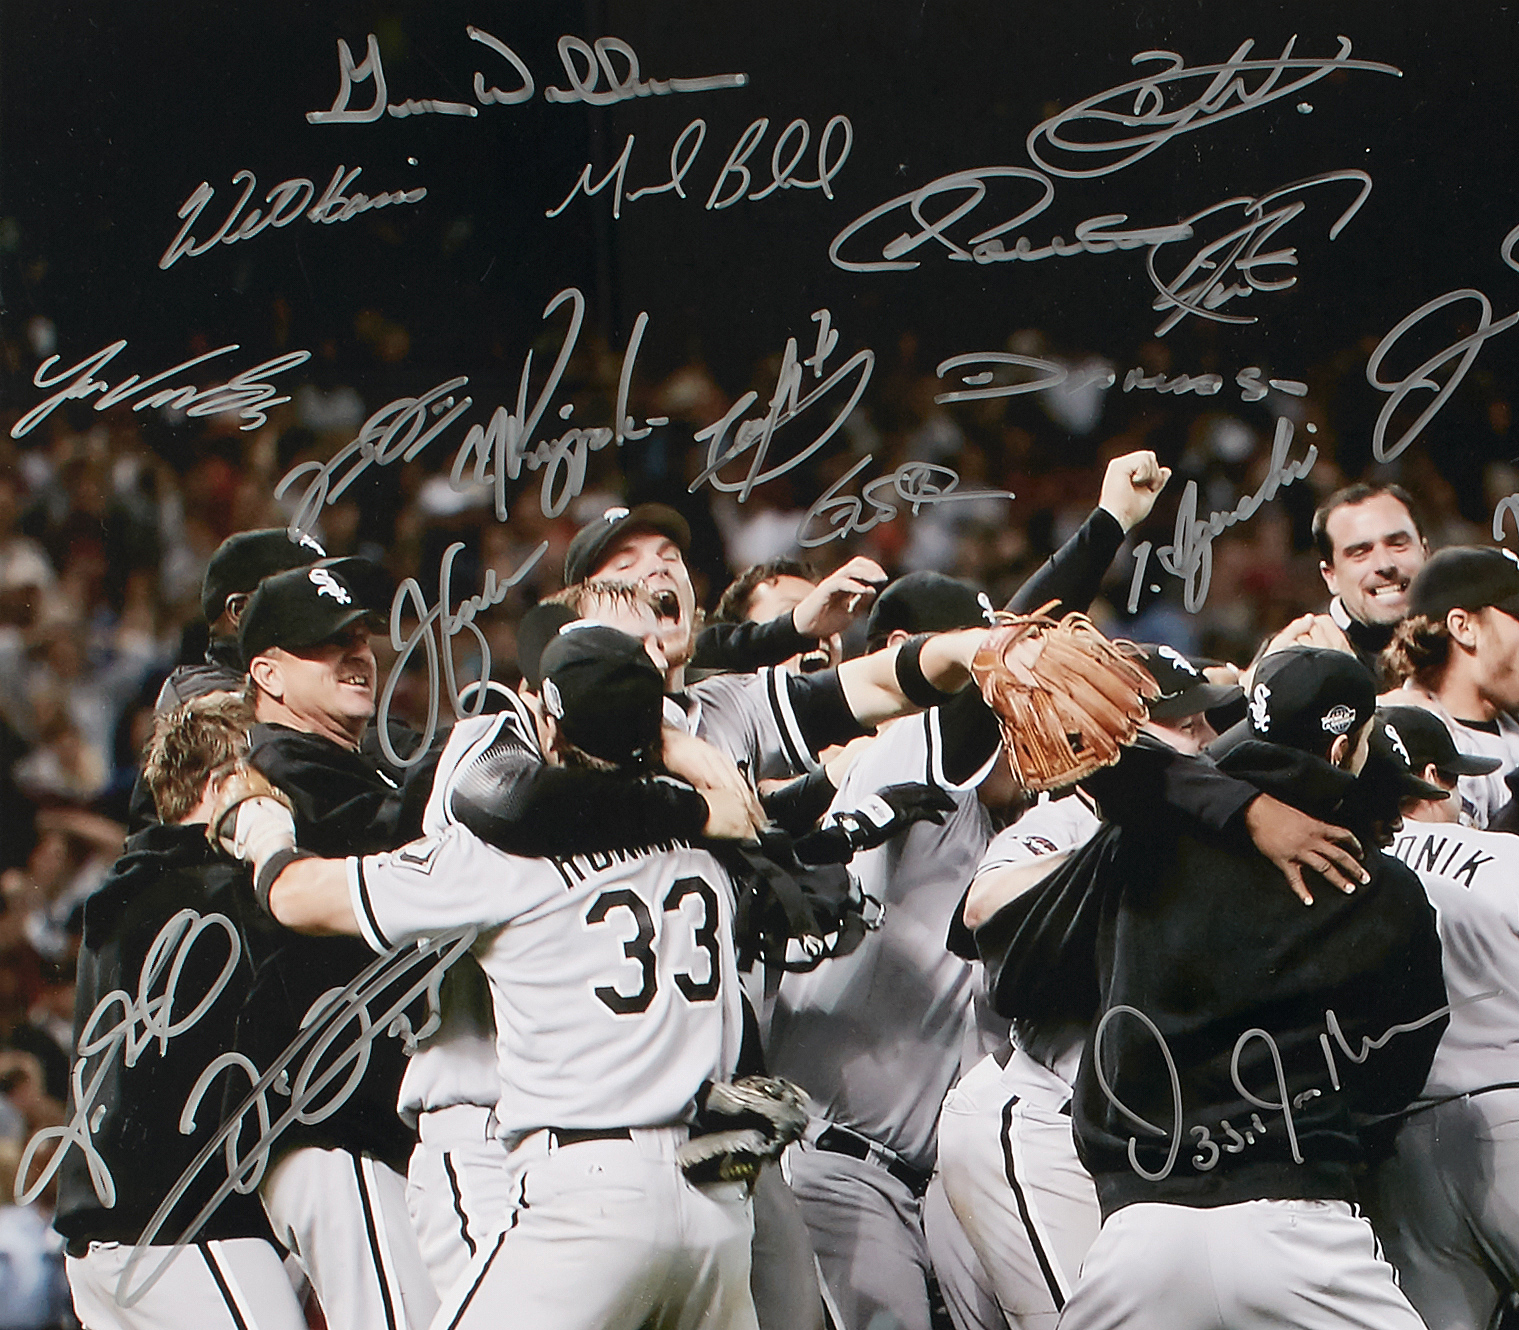 2005 Chicago White Sox World Series Champs Team Signed 16x20 Photo